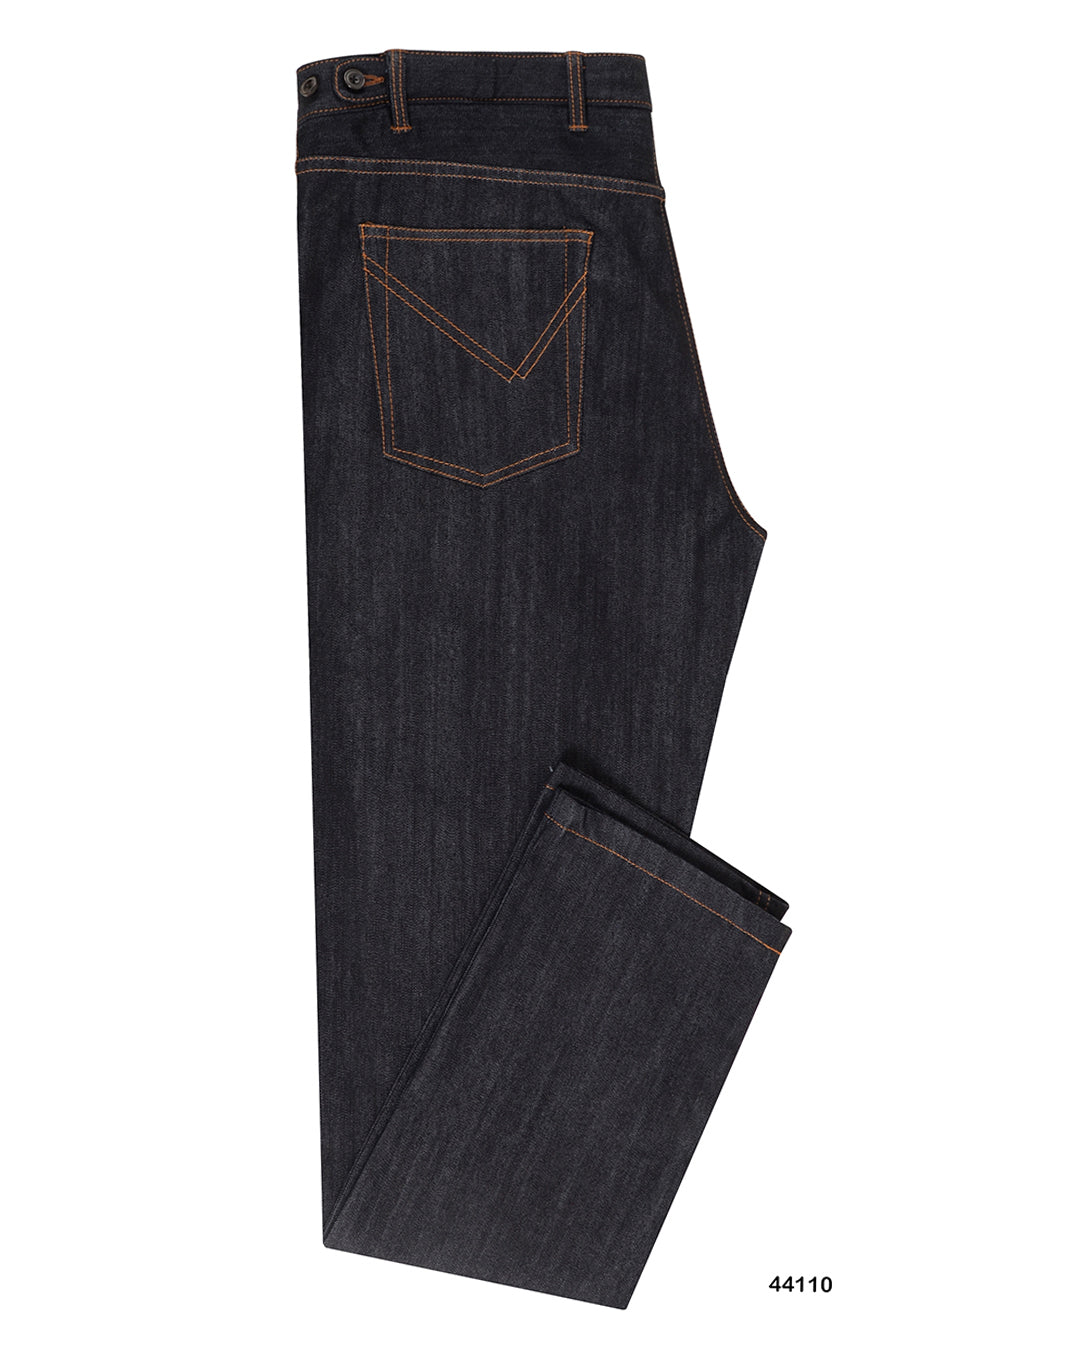 Side view of custom denim jeans for men by Luxire in midnight blue